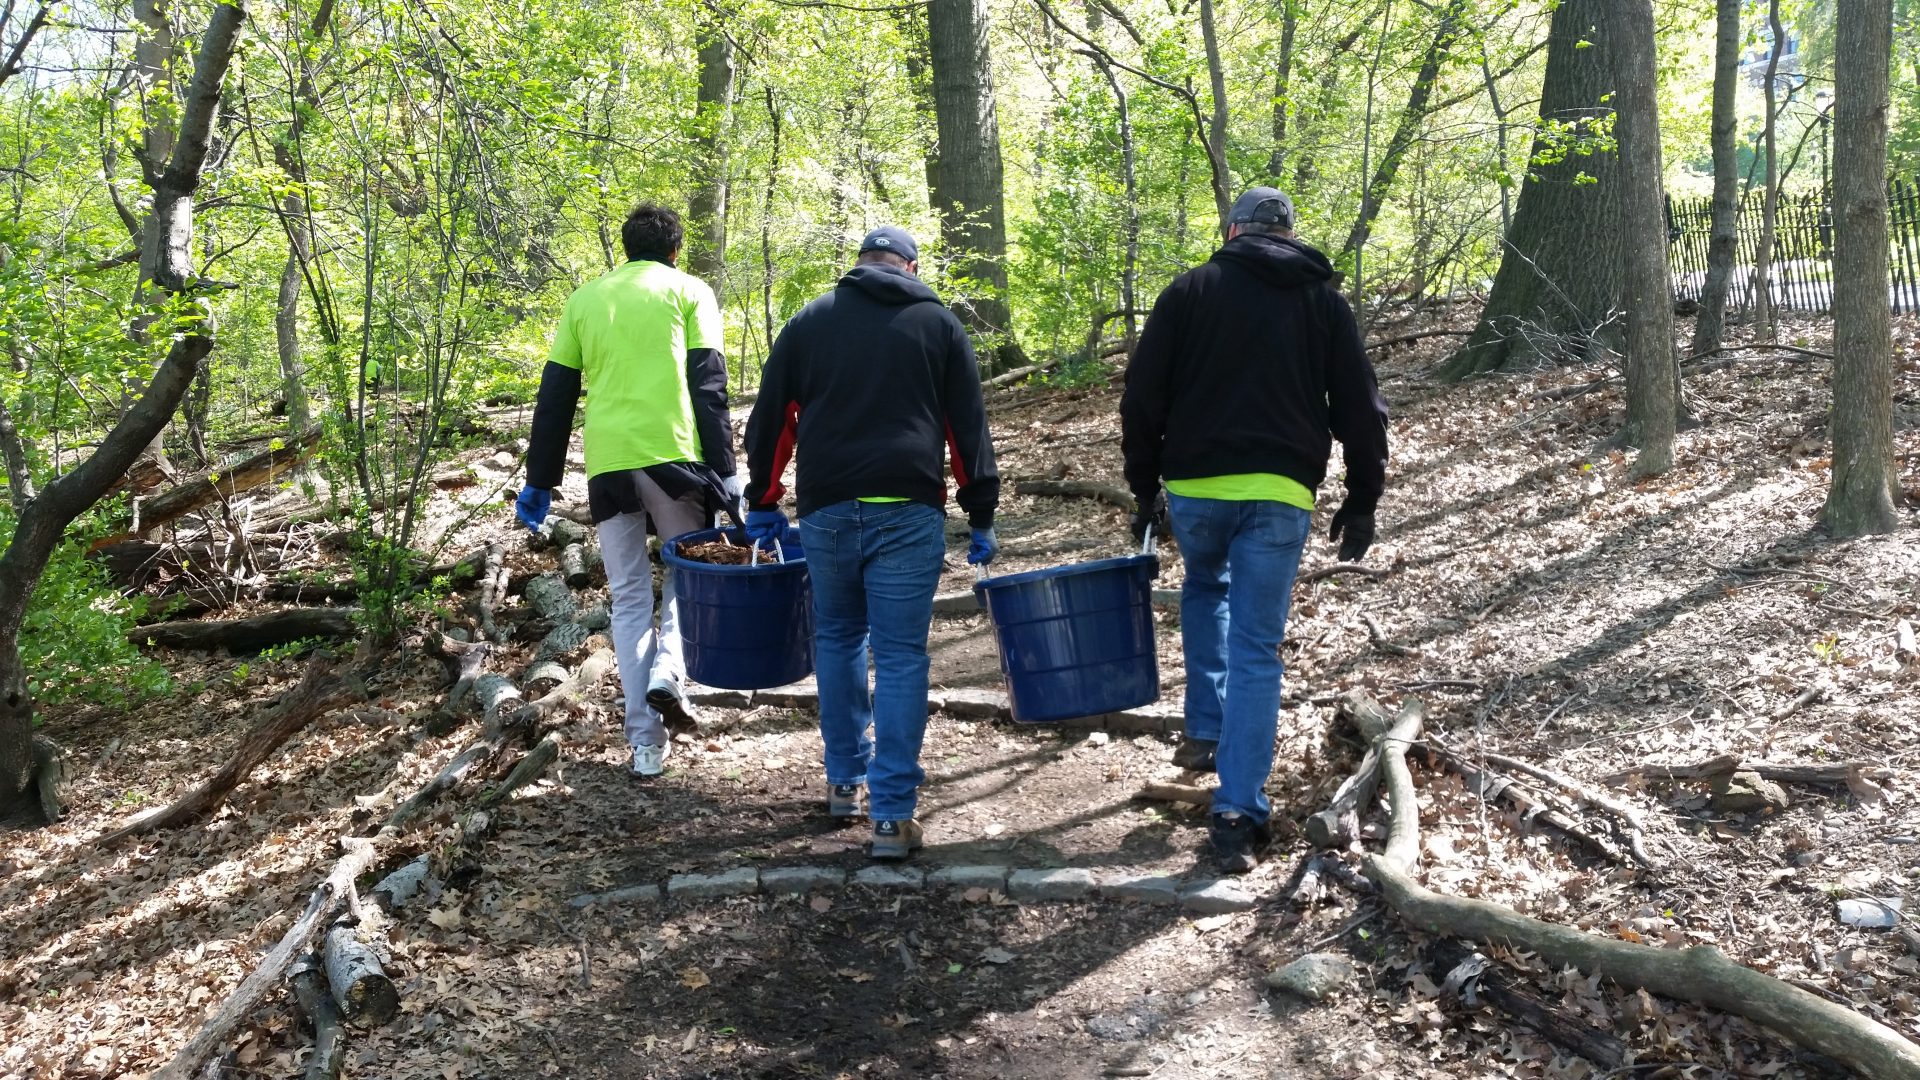 Volunteers carry a bucket through a woodland path